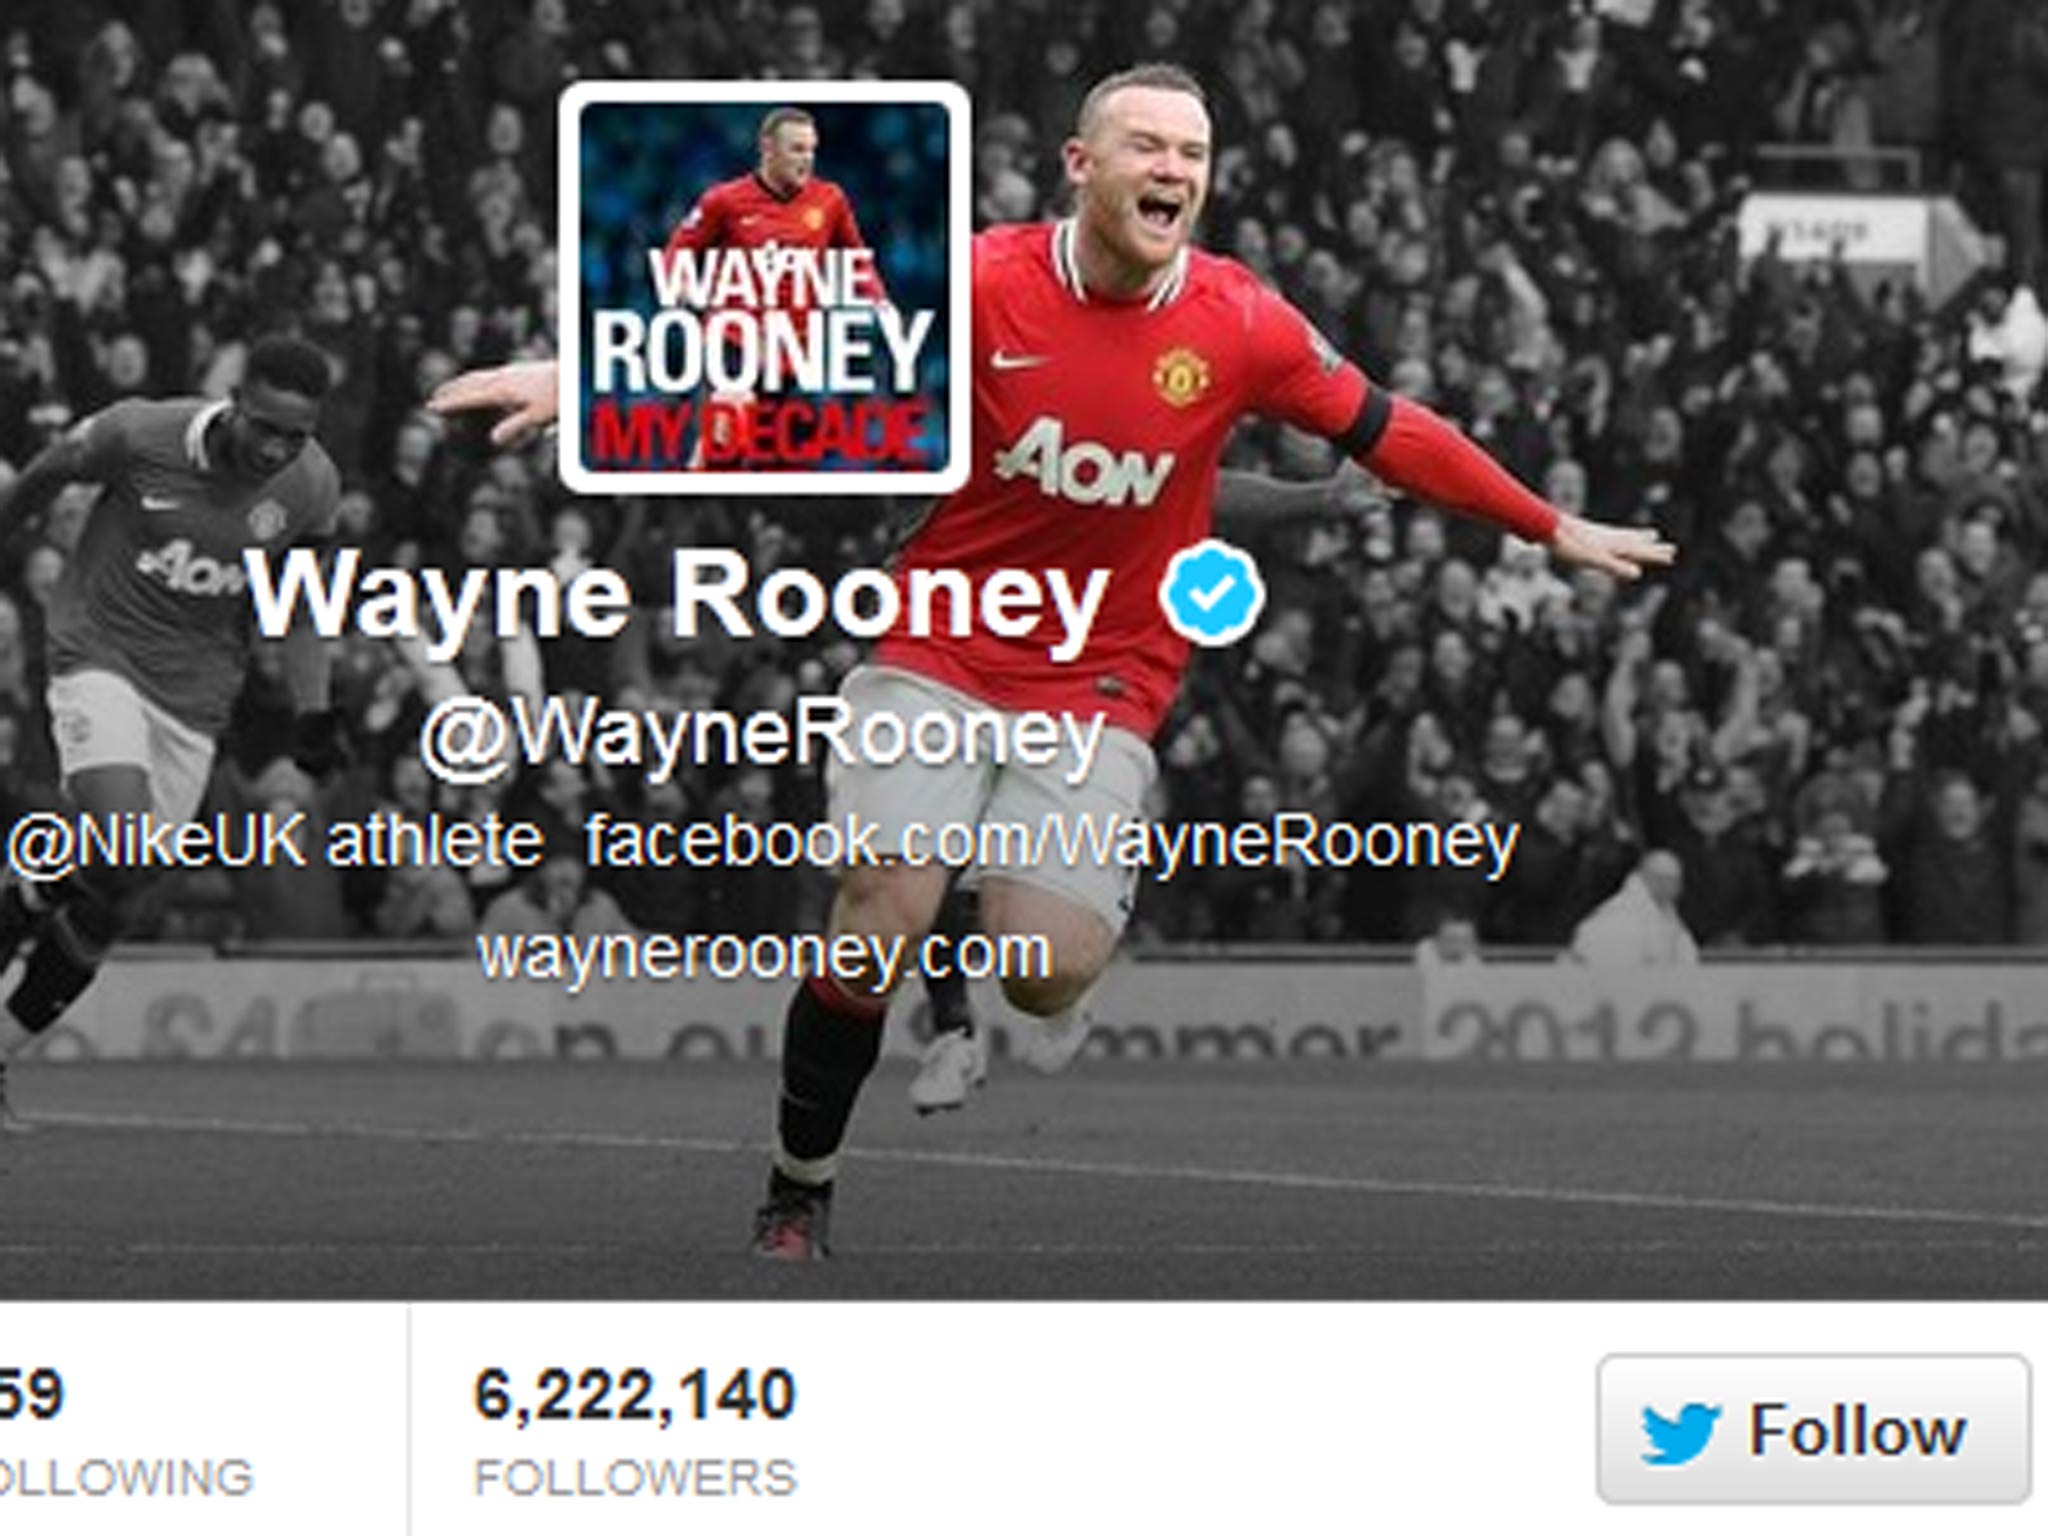 A view of Wayne Rooney's Twitter profile